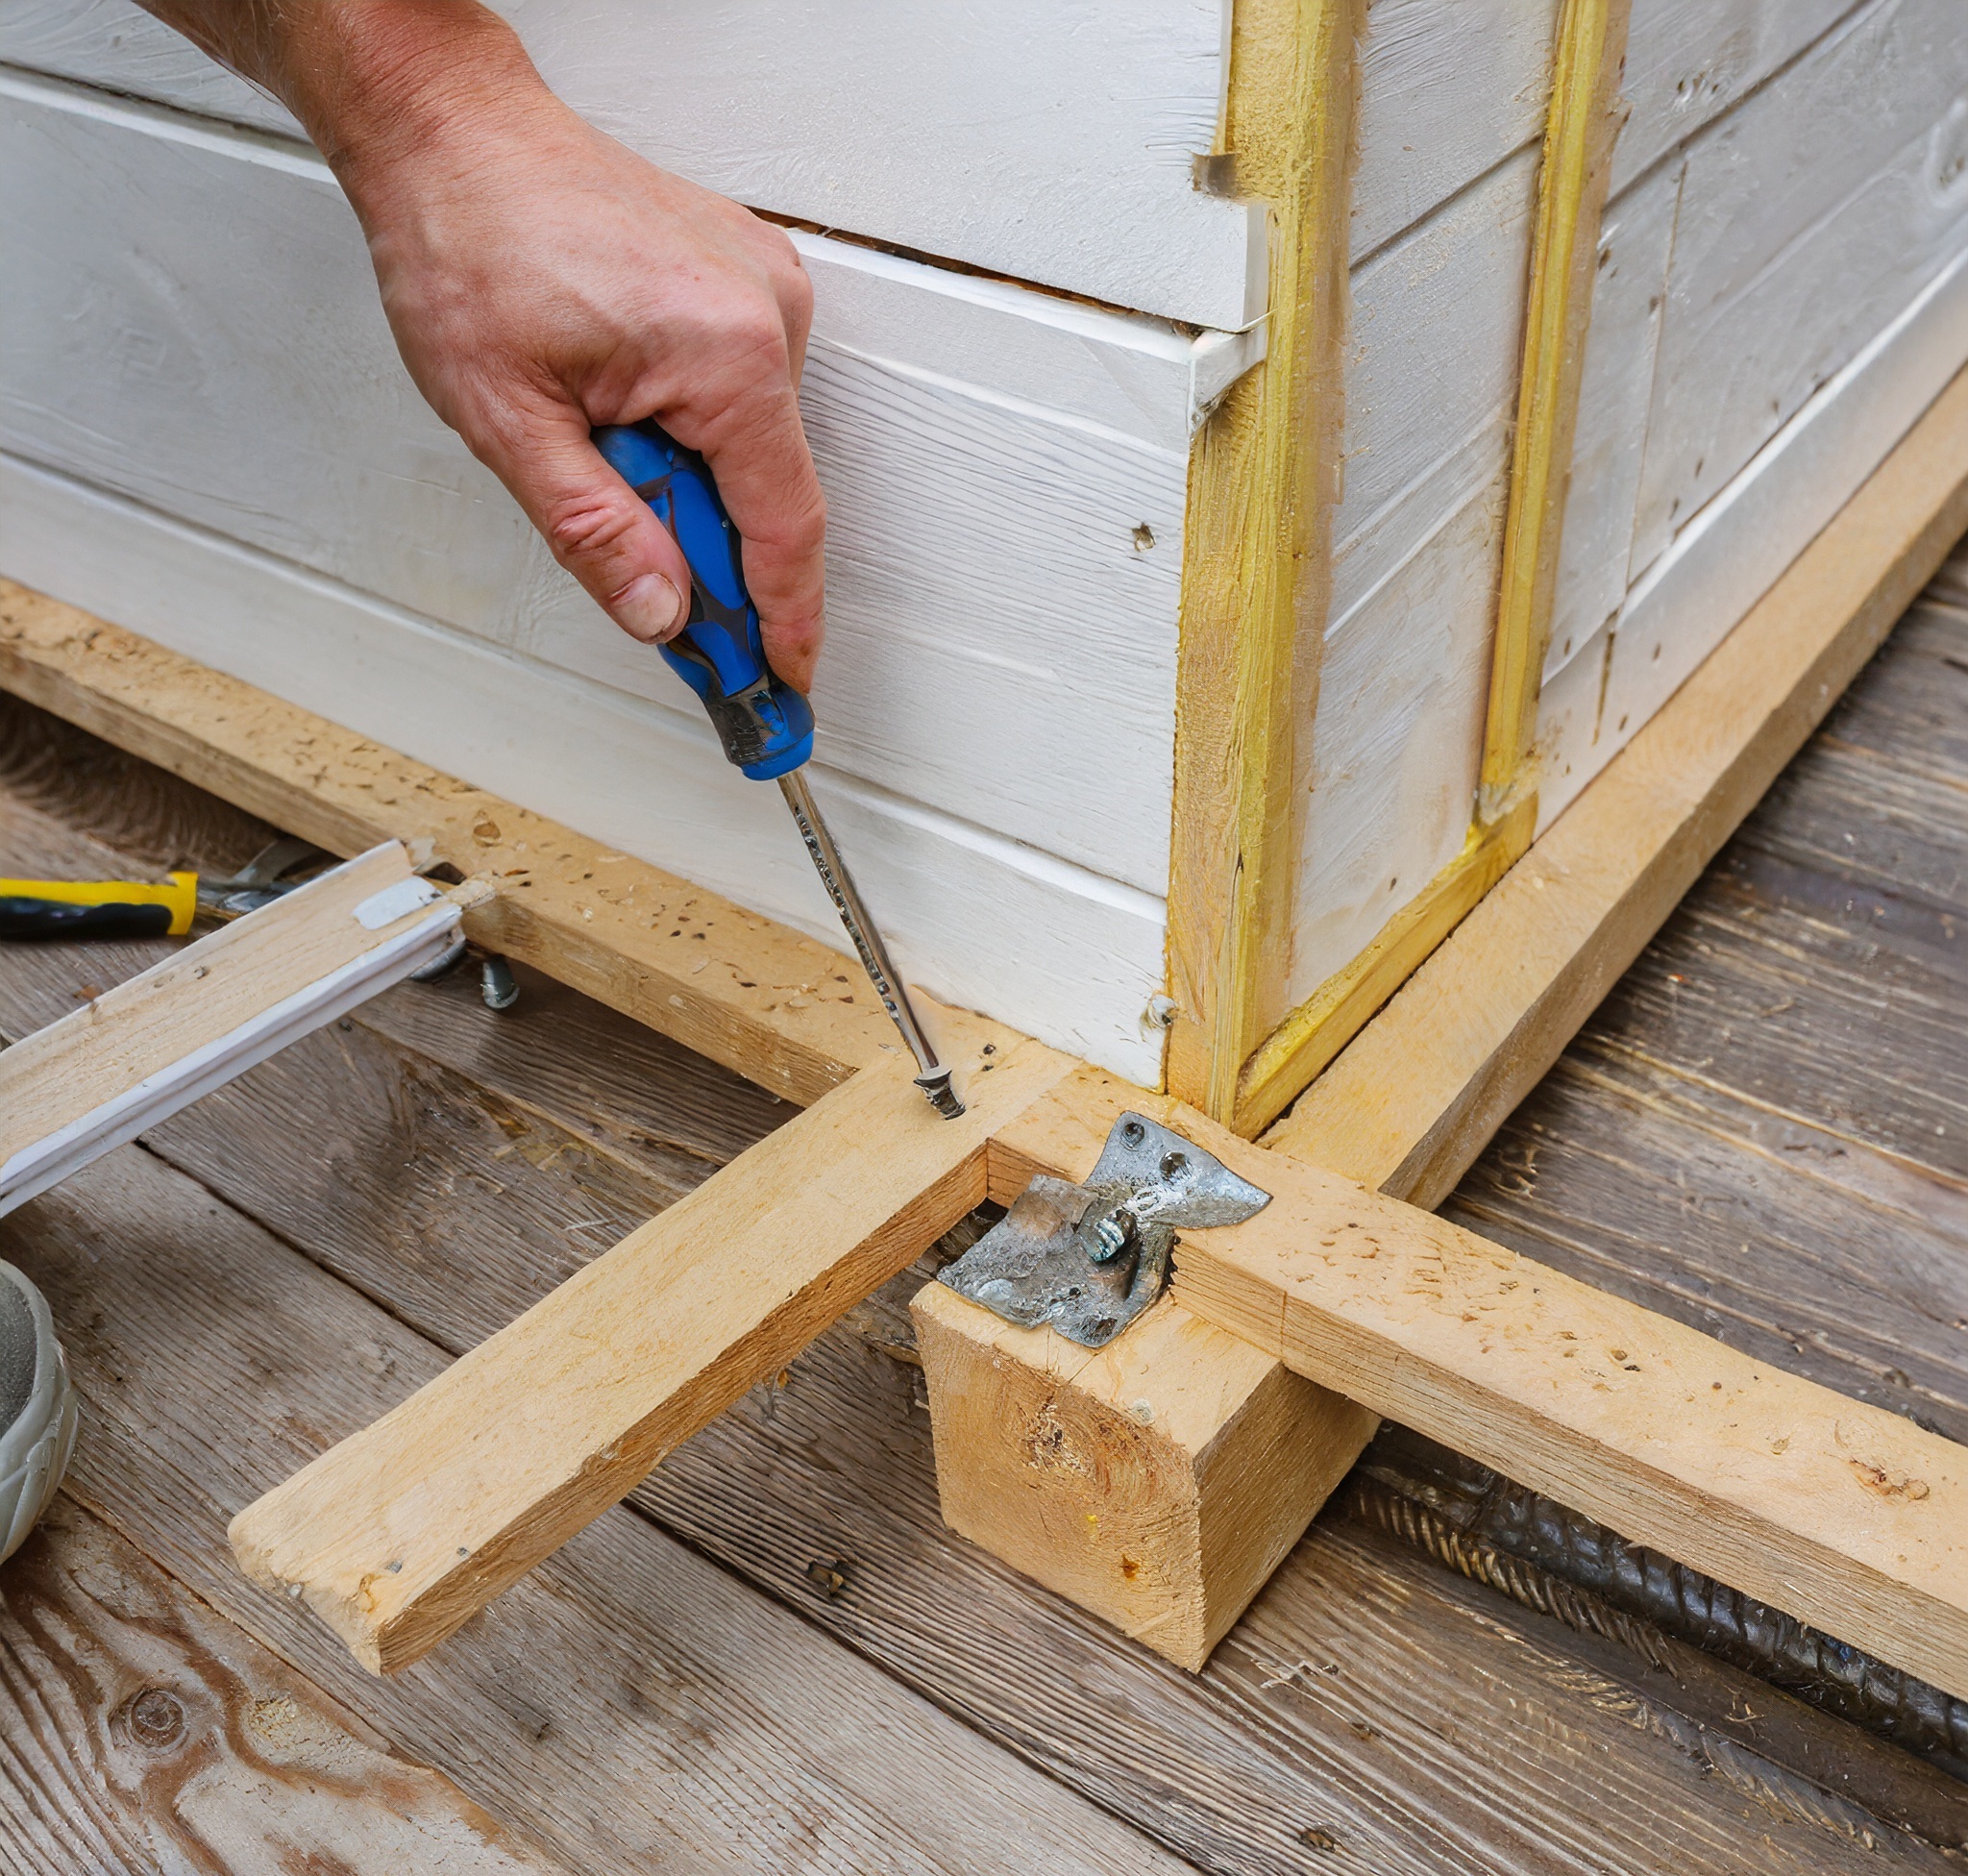 Attaching wooden walls to the base of the dog house